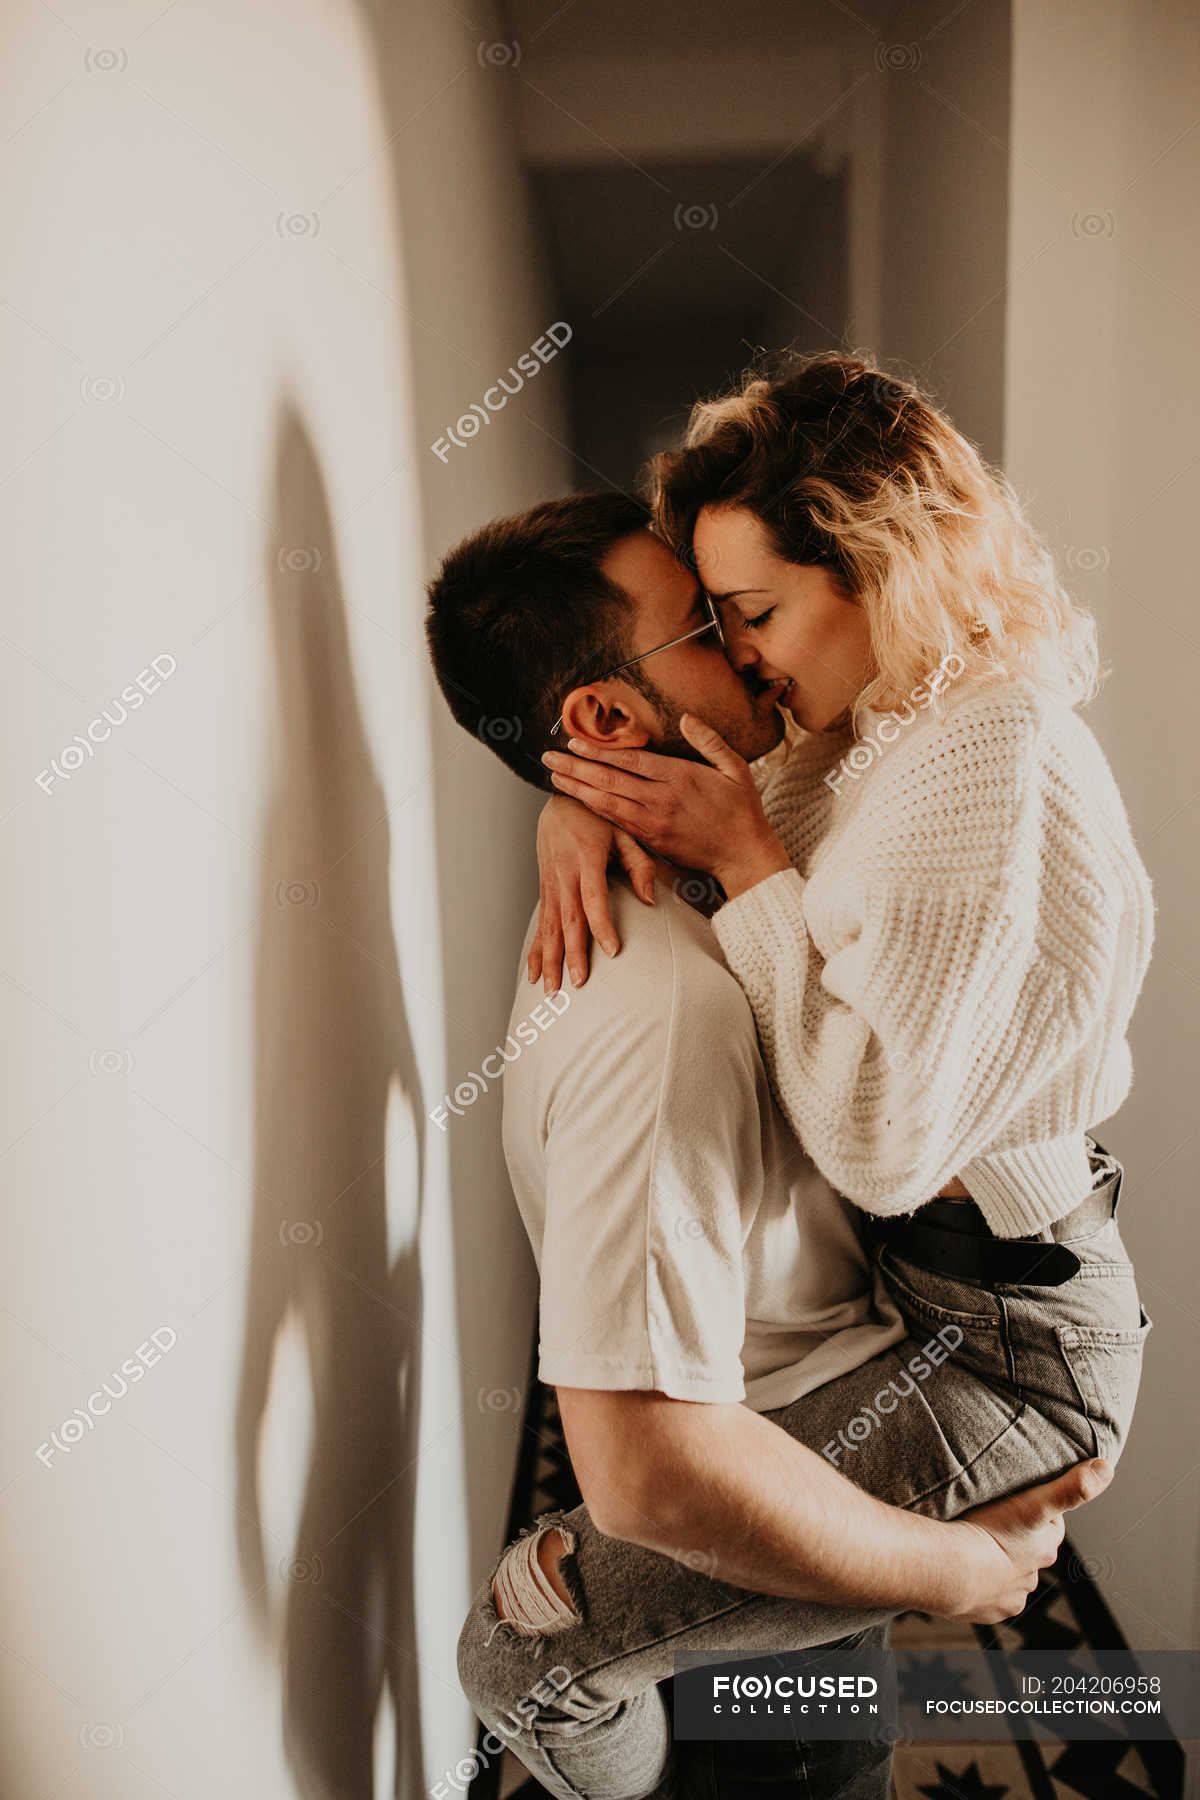 https://st.focusedcollection.com/9163412/i/1800/focused_204206958-stock-photo-passionate-man-woman-embracing-kissing.jpg